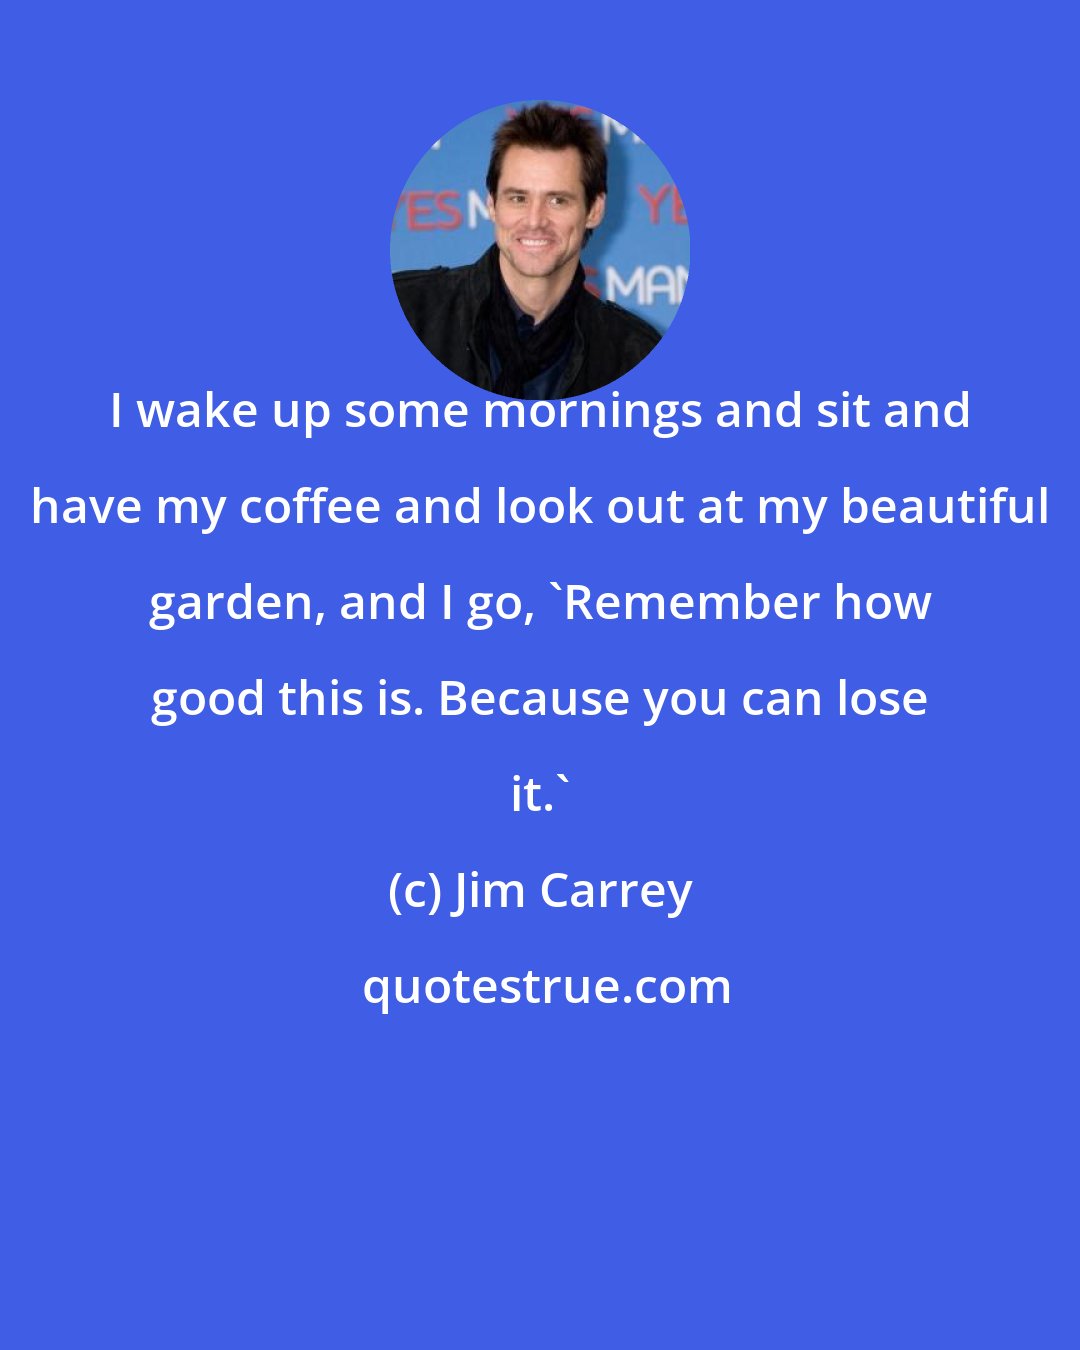 Jim Carrey: I wake up some mornings and sit and have my coffee and look out at my beautiful garden, and I go, 'Remember how good this is. Because you can lose it.'